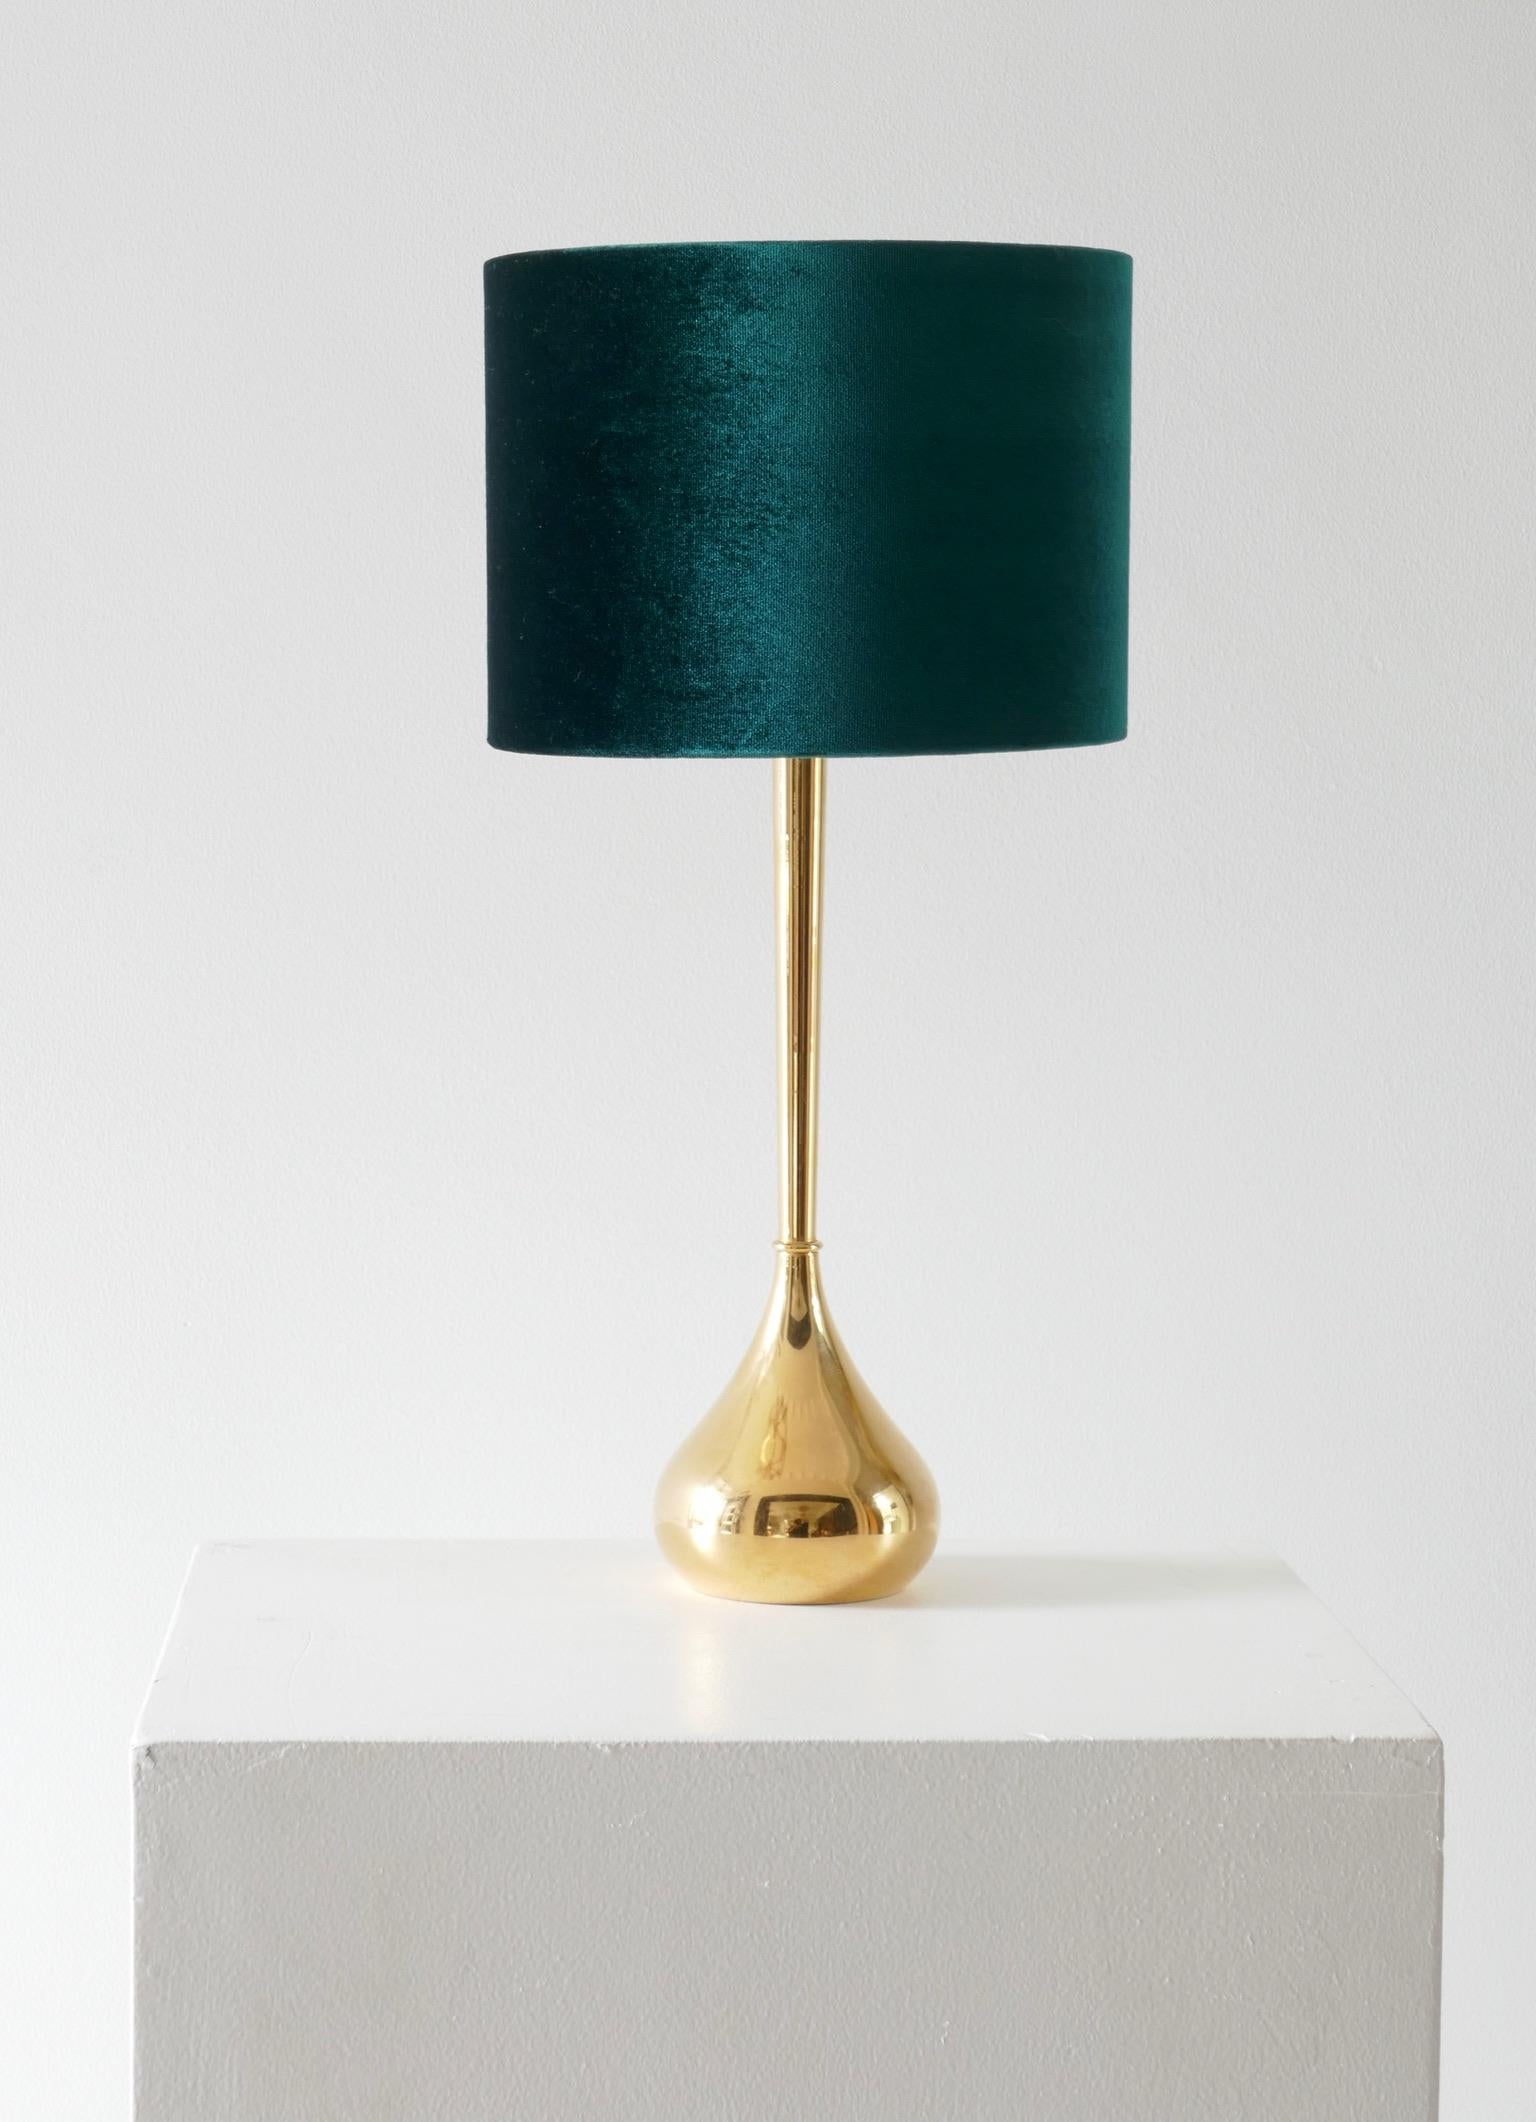 Mid-20th Century Set of Two Danish 24-Carat Gold-Plated Brass Table Lamps by Hugo Asmussen, 1960s